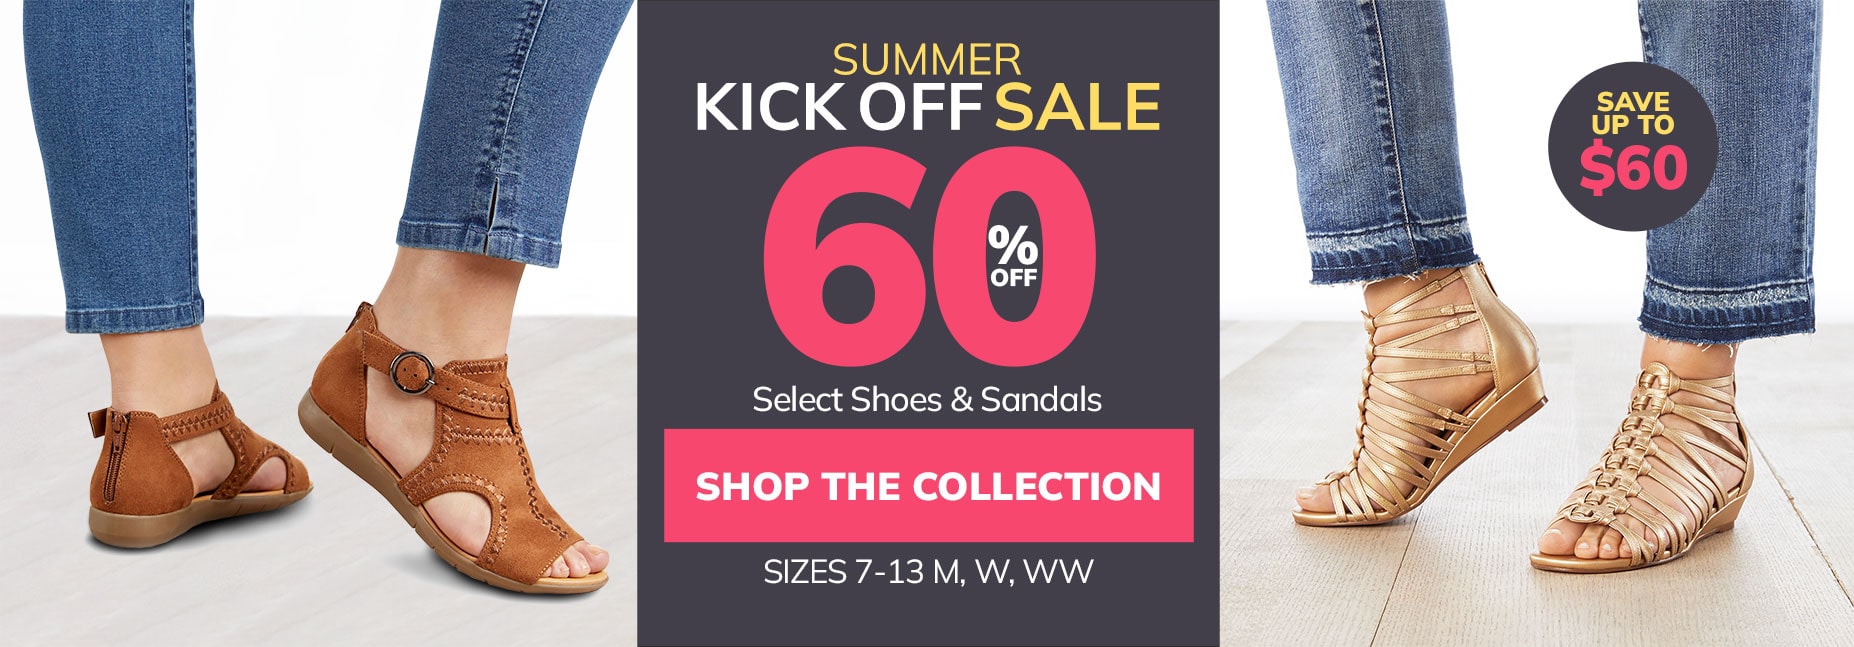 60% OFF SHOES AND SANDALS